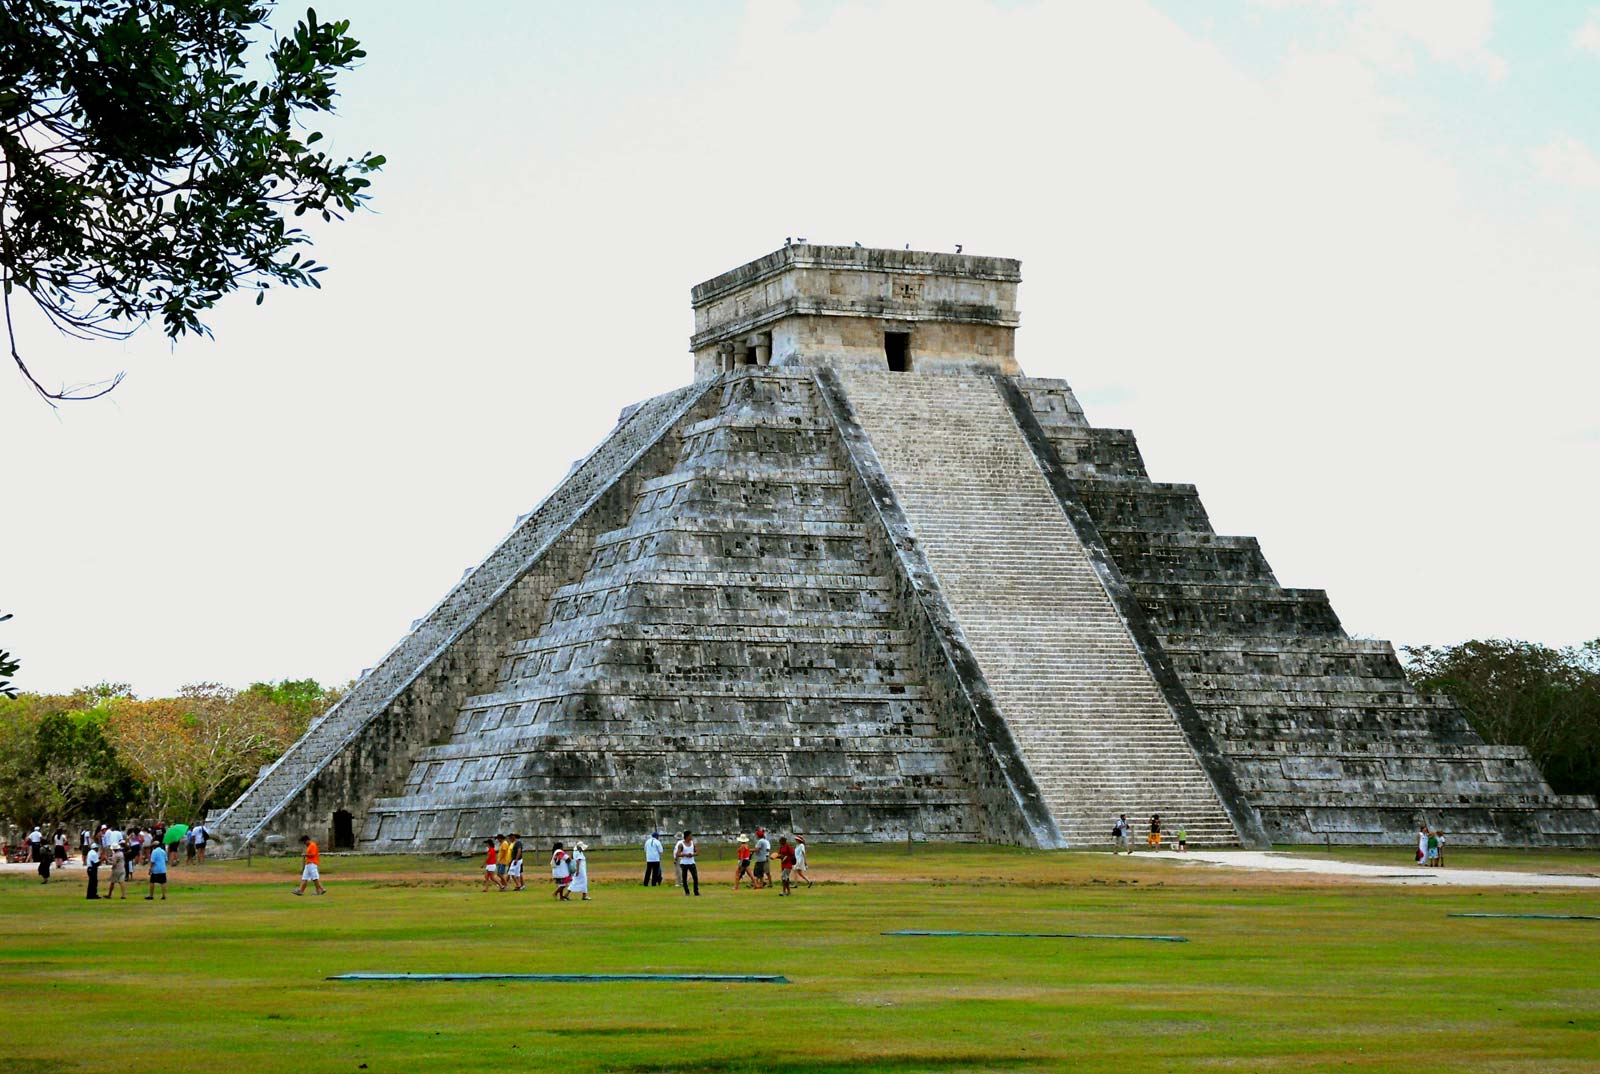 Can You Pass This 40-Question Geography Test That Gets Progressively Harder With Each Question? Chichen Itza in Yucatan, Mexico